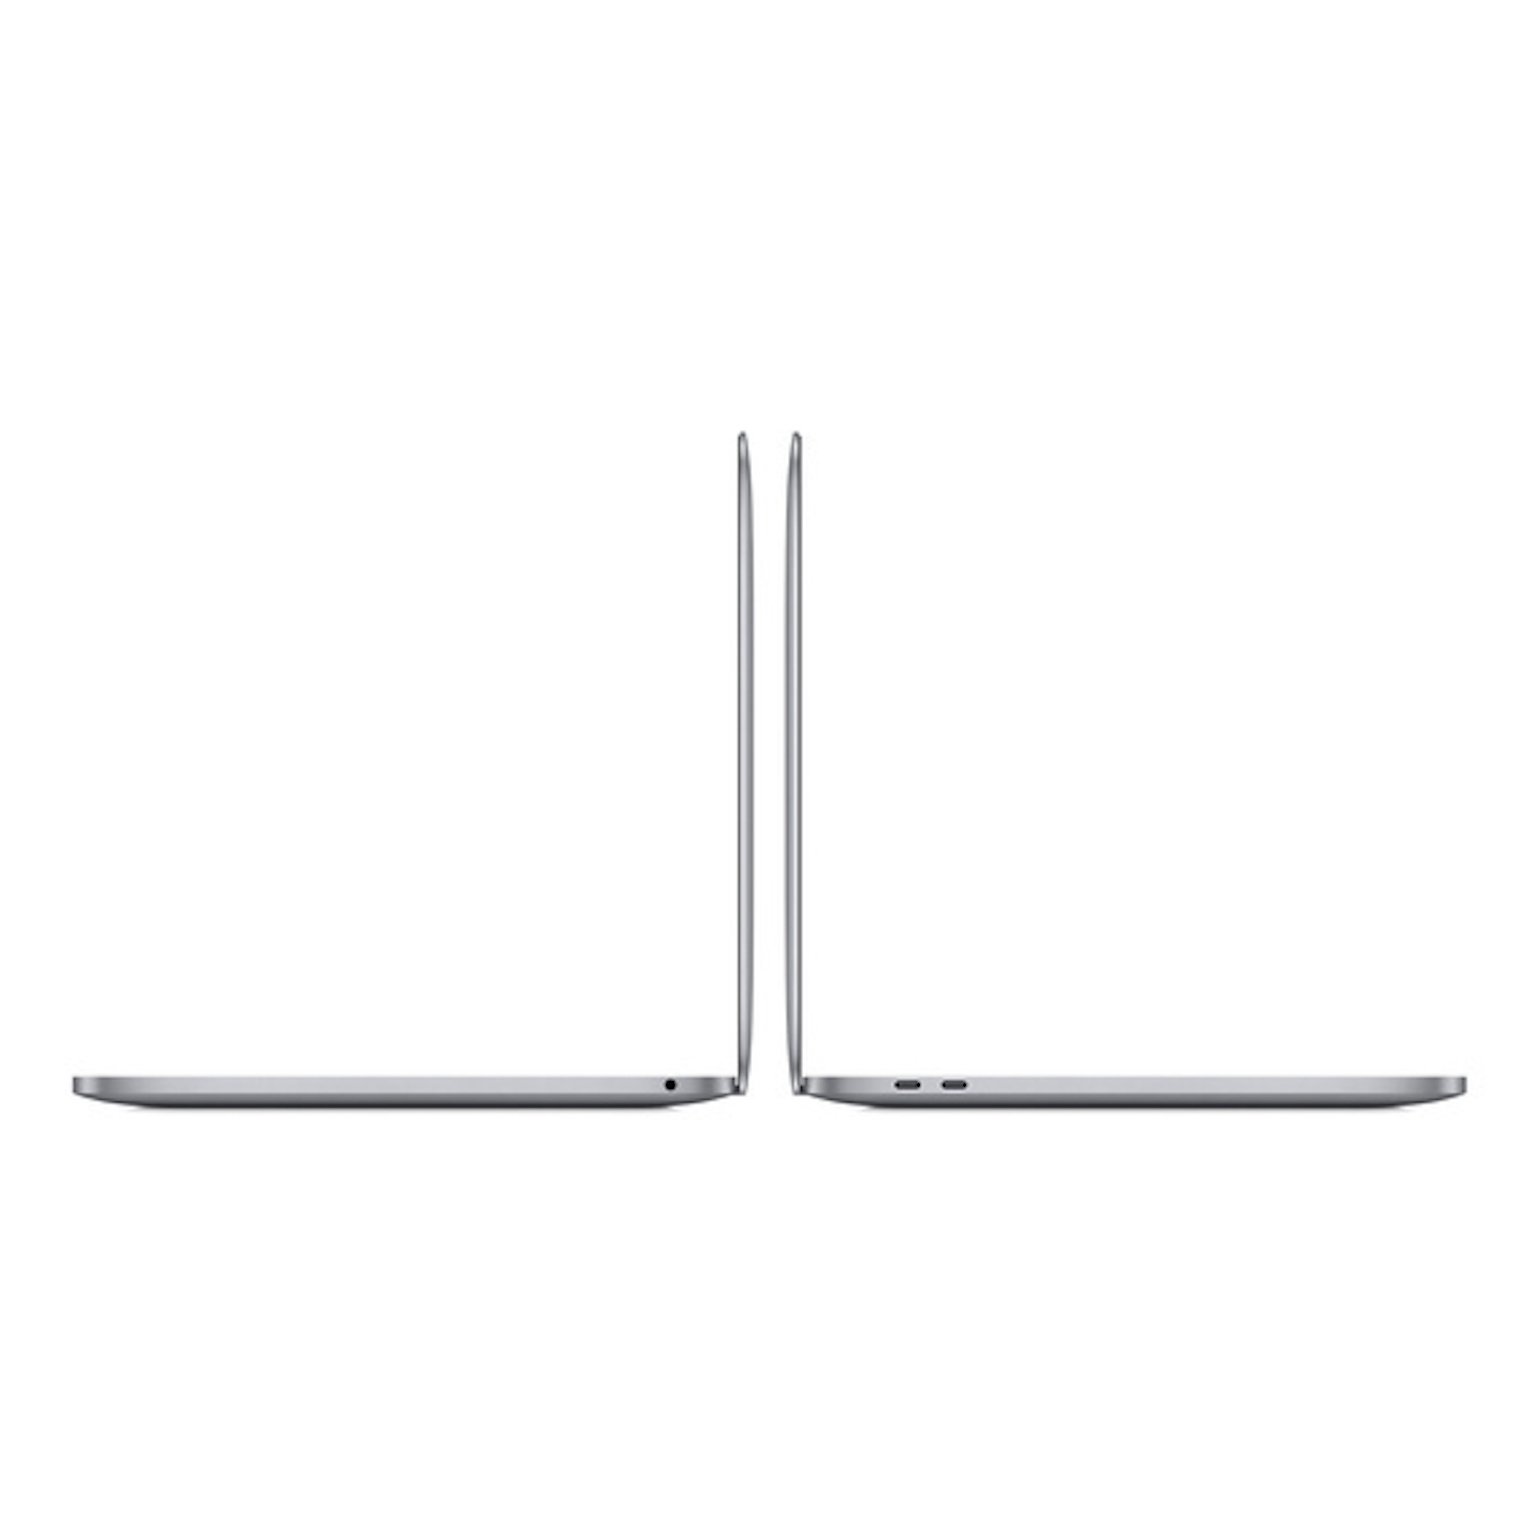 Prozessor, 16 i5 512 2020, Pro Space notebook 13,3 Touch Refurbished MacBook (*) Intel® Display, APPLE 13\